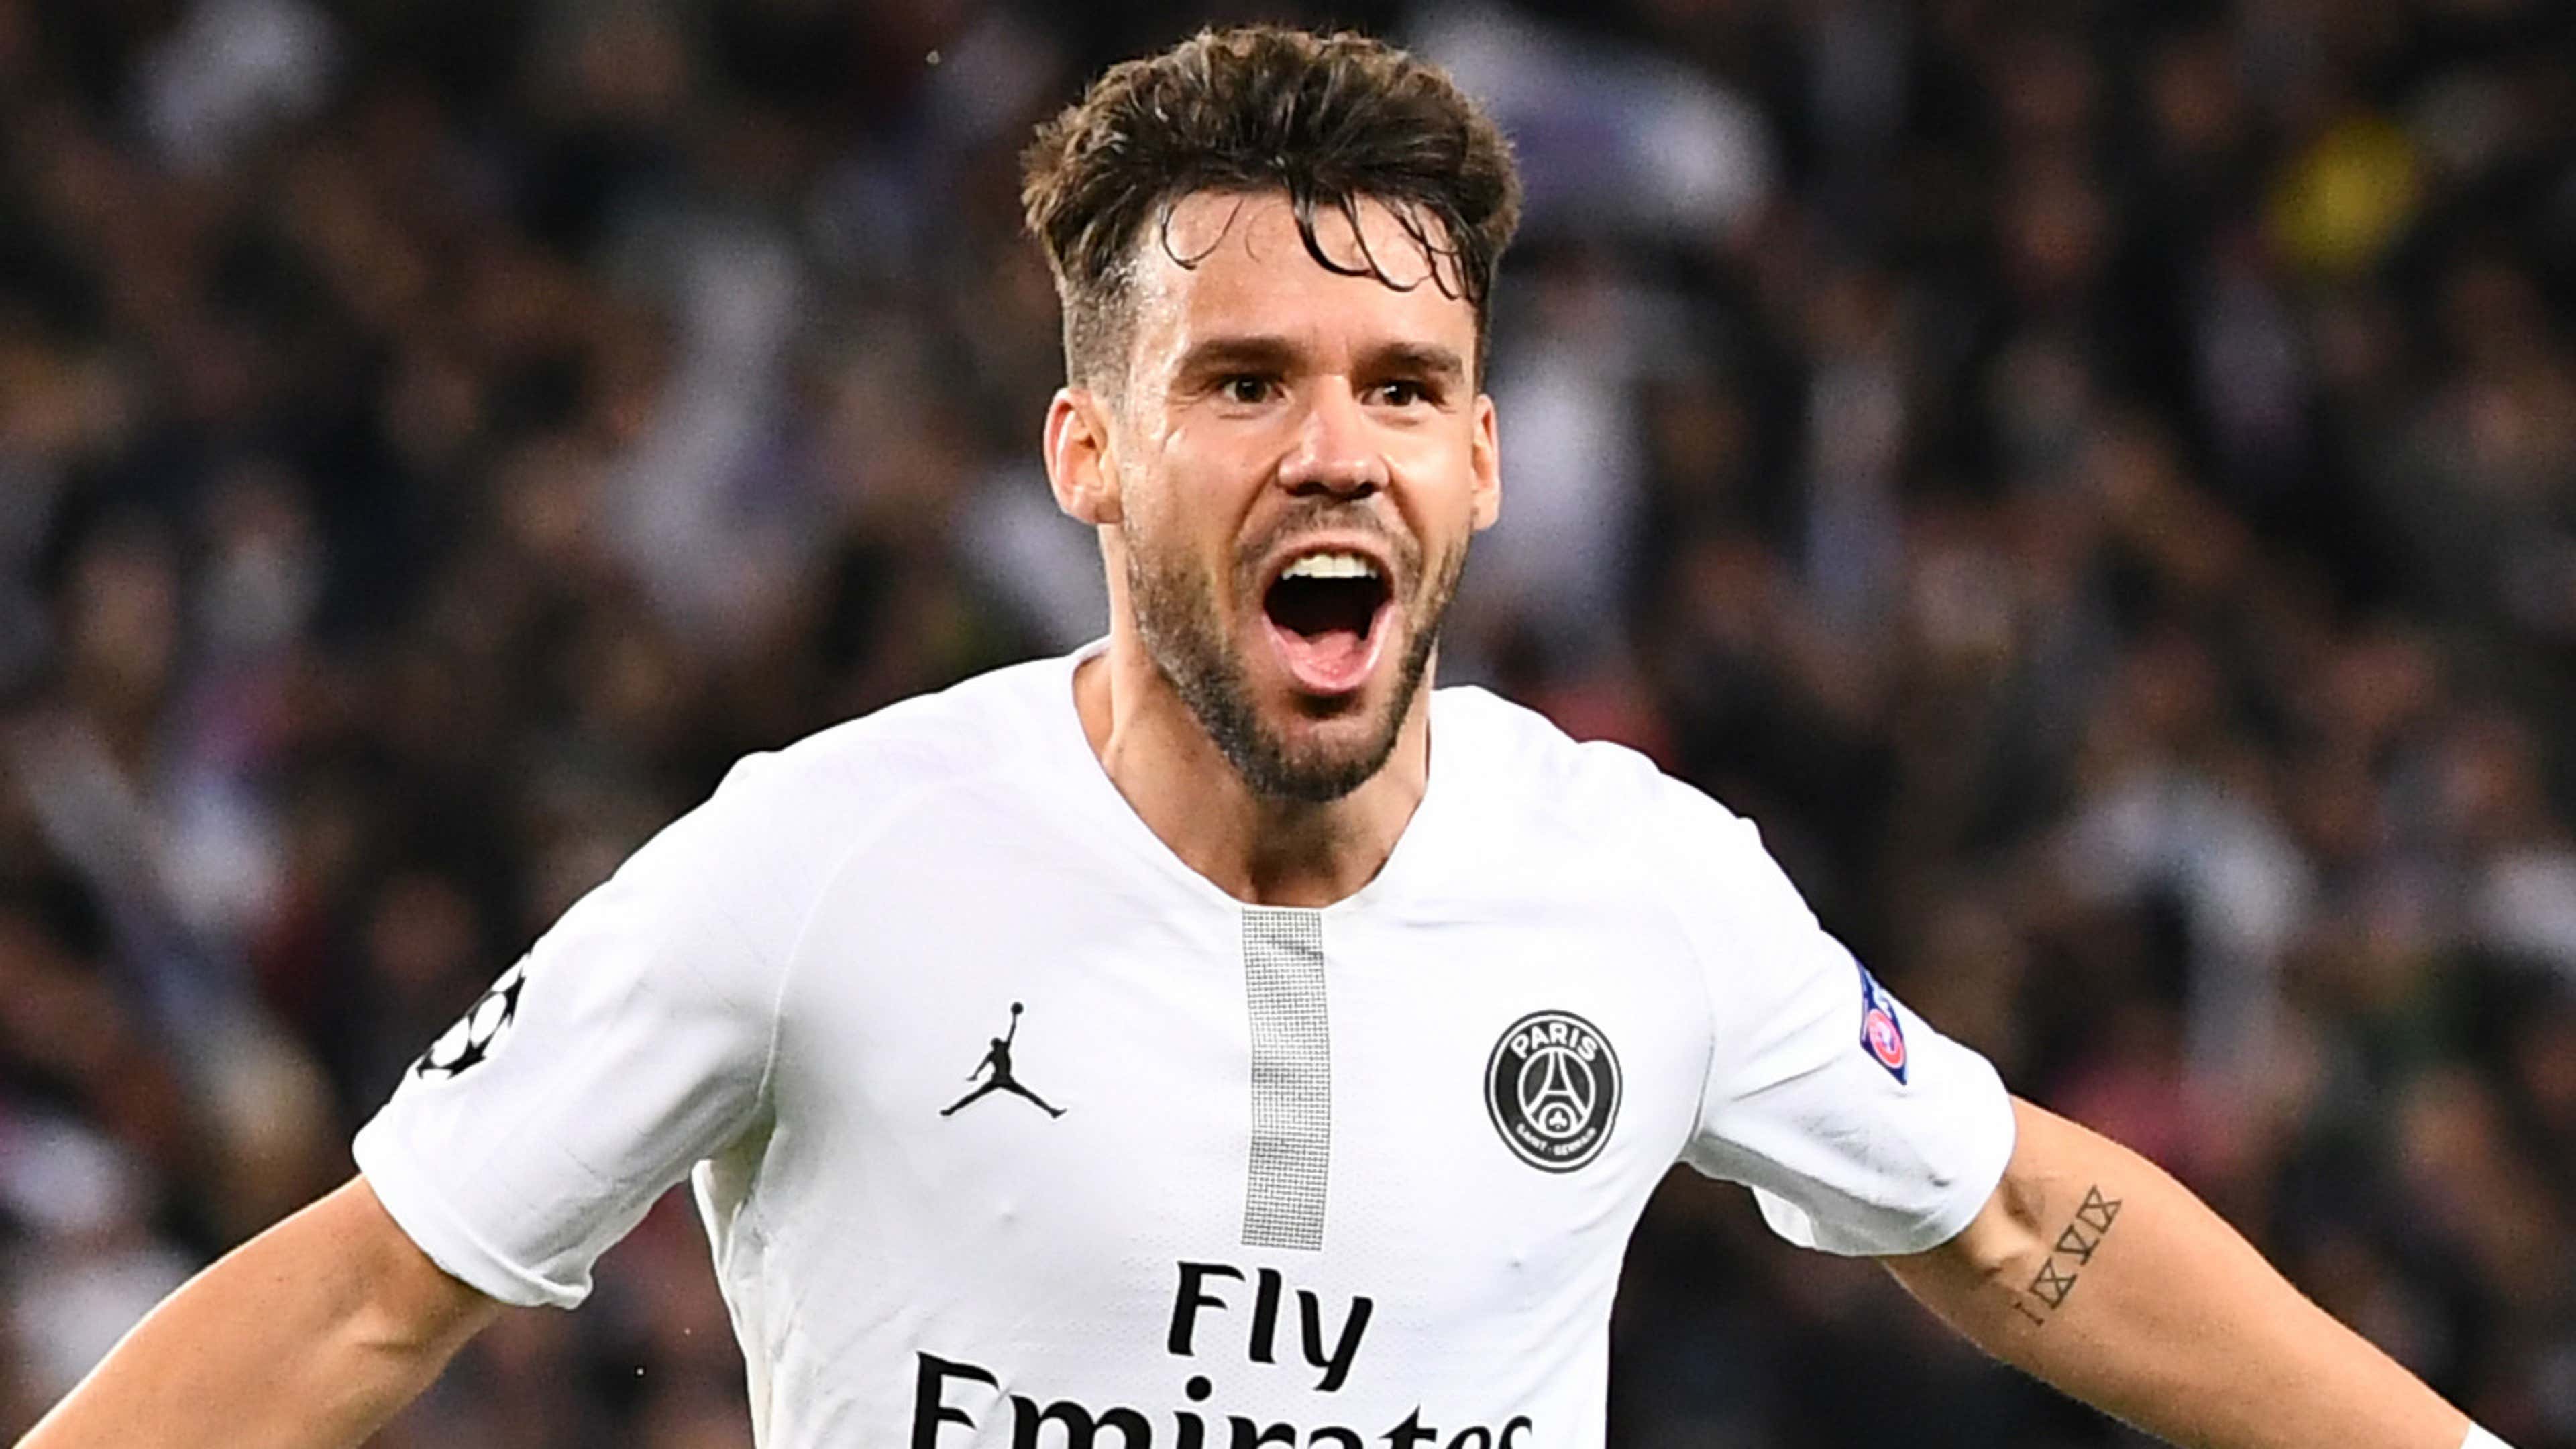 There is a Really Exciting Project Here' — Bernat on the Decision to Sign  an Extension Deal With PSG - PSG Talk